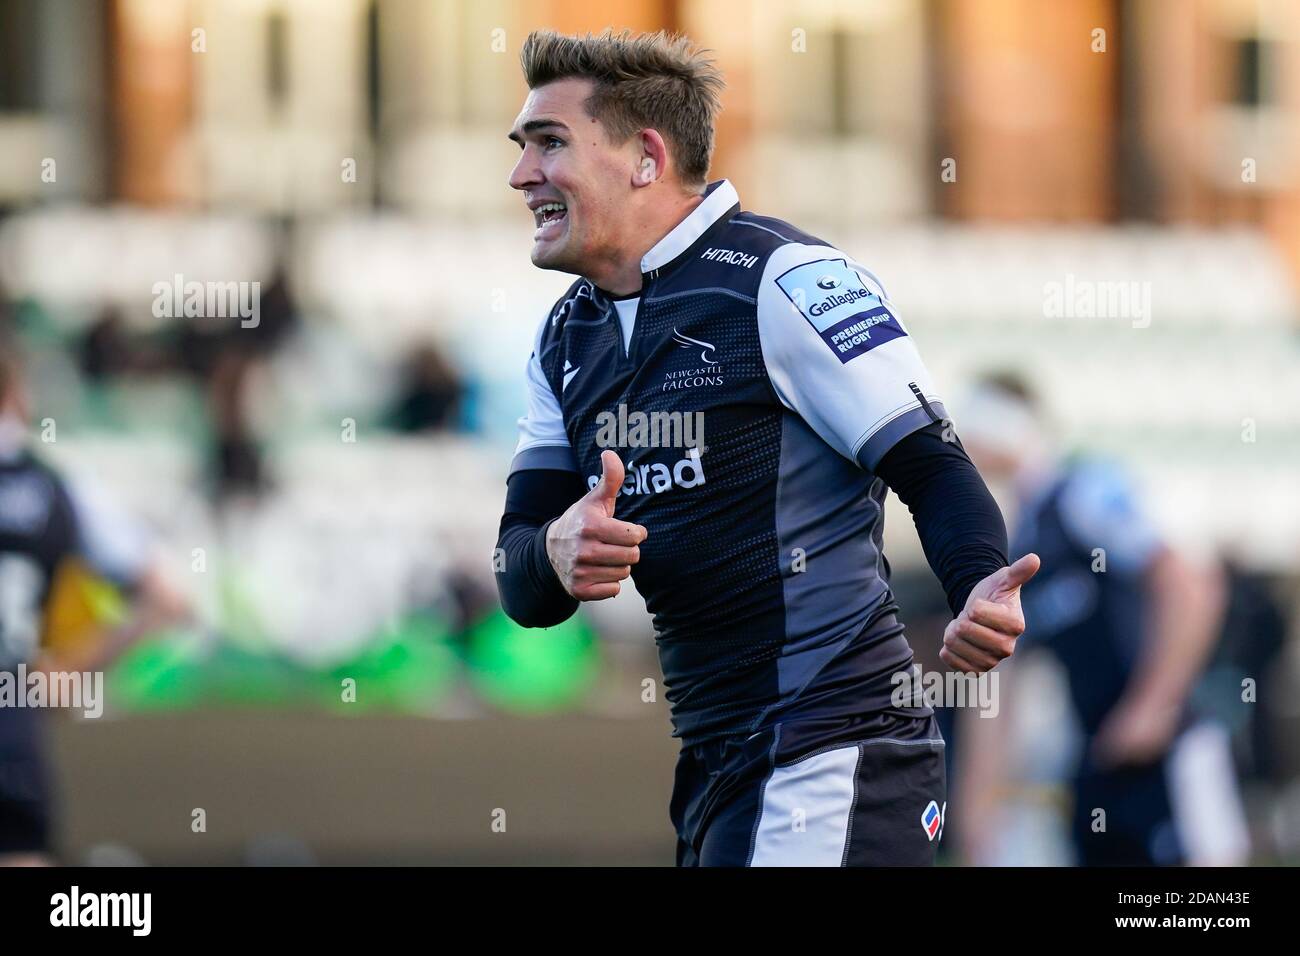 Kenton Bank Foot, UK. 07th July, 2020. Toby FLOOD (12) of Newcastle Falcons during the Friendly match between Newcastle Falcons and Ealing Trailfinders at Kingston Park, Kenton Bank Foot, Newcastle, England on 13 November 2020. Photo by David Horn. Credit: PRiME Media Images/Alamy Live News Stock Photo